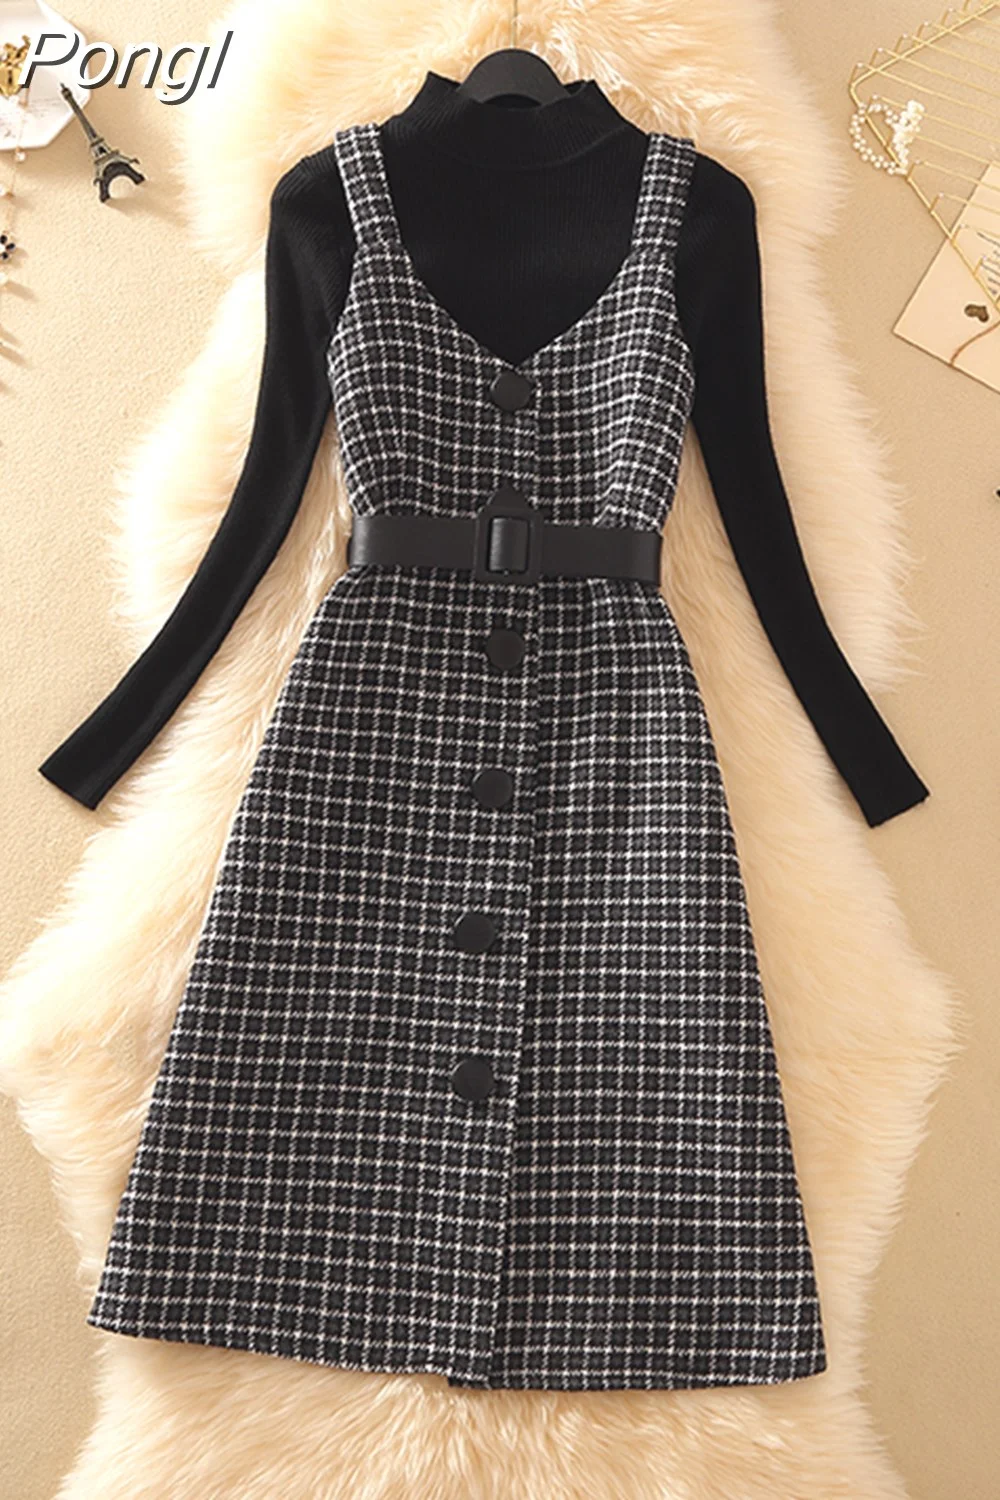 Pongl Piece Dress Set Women Autumn Winter Solid Base Sweater and Sleeveless Knee-Length Plaid Tweed Dresses Suits With belt